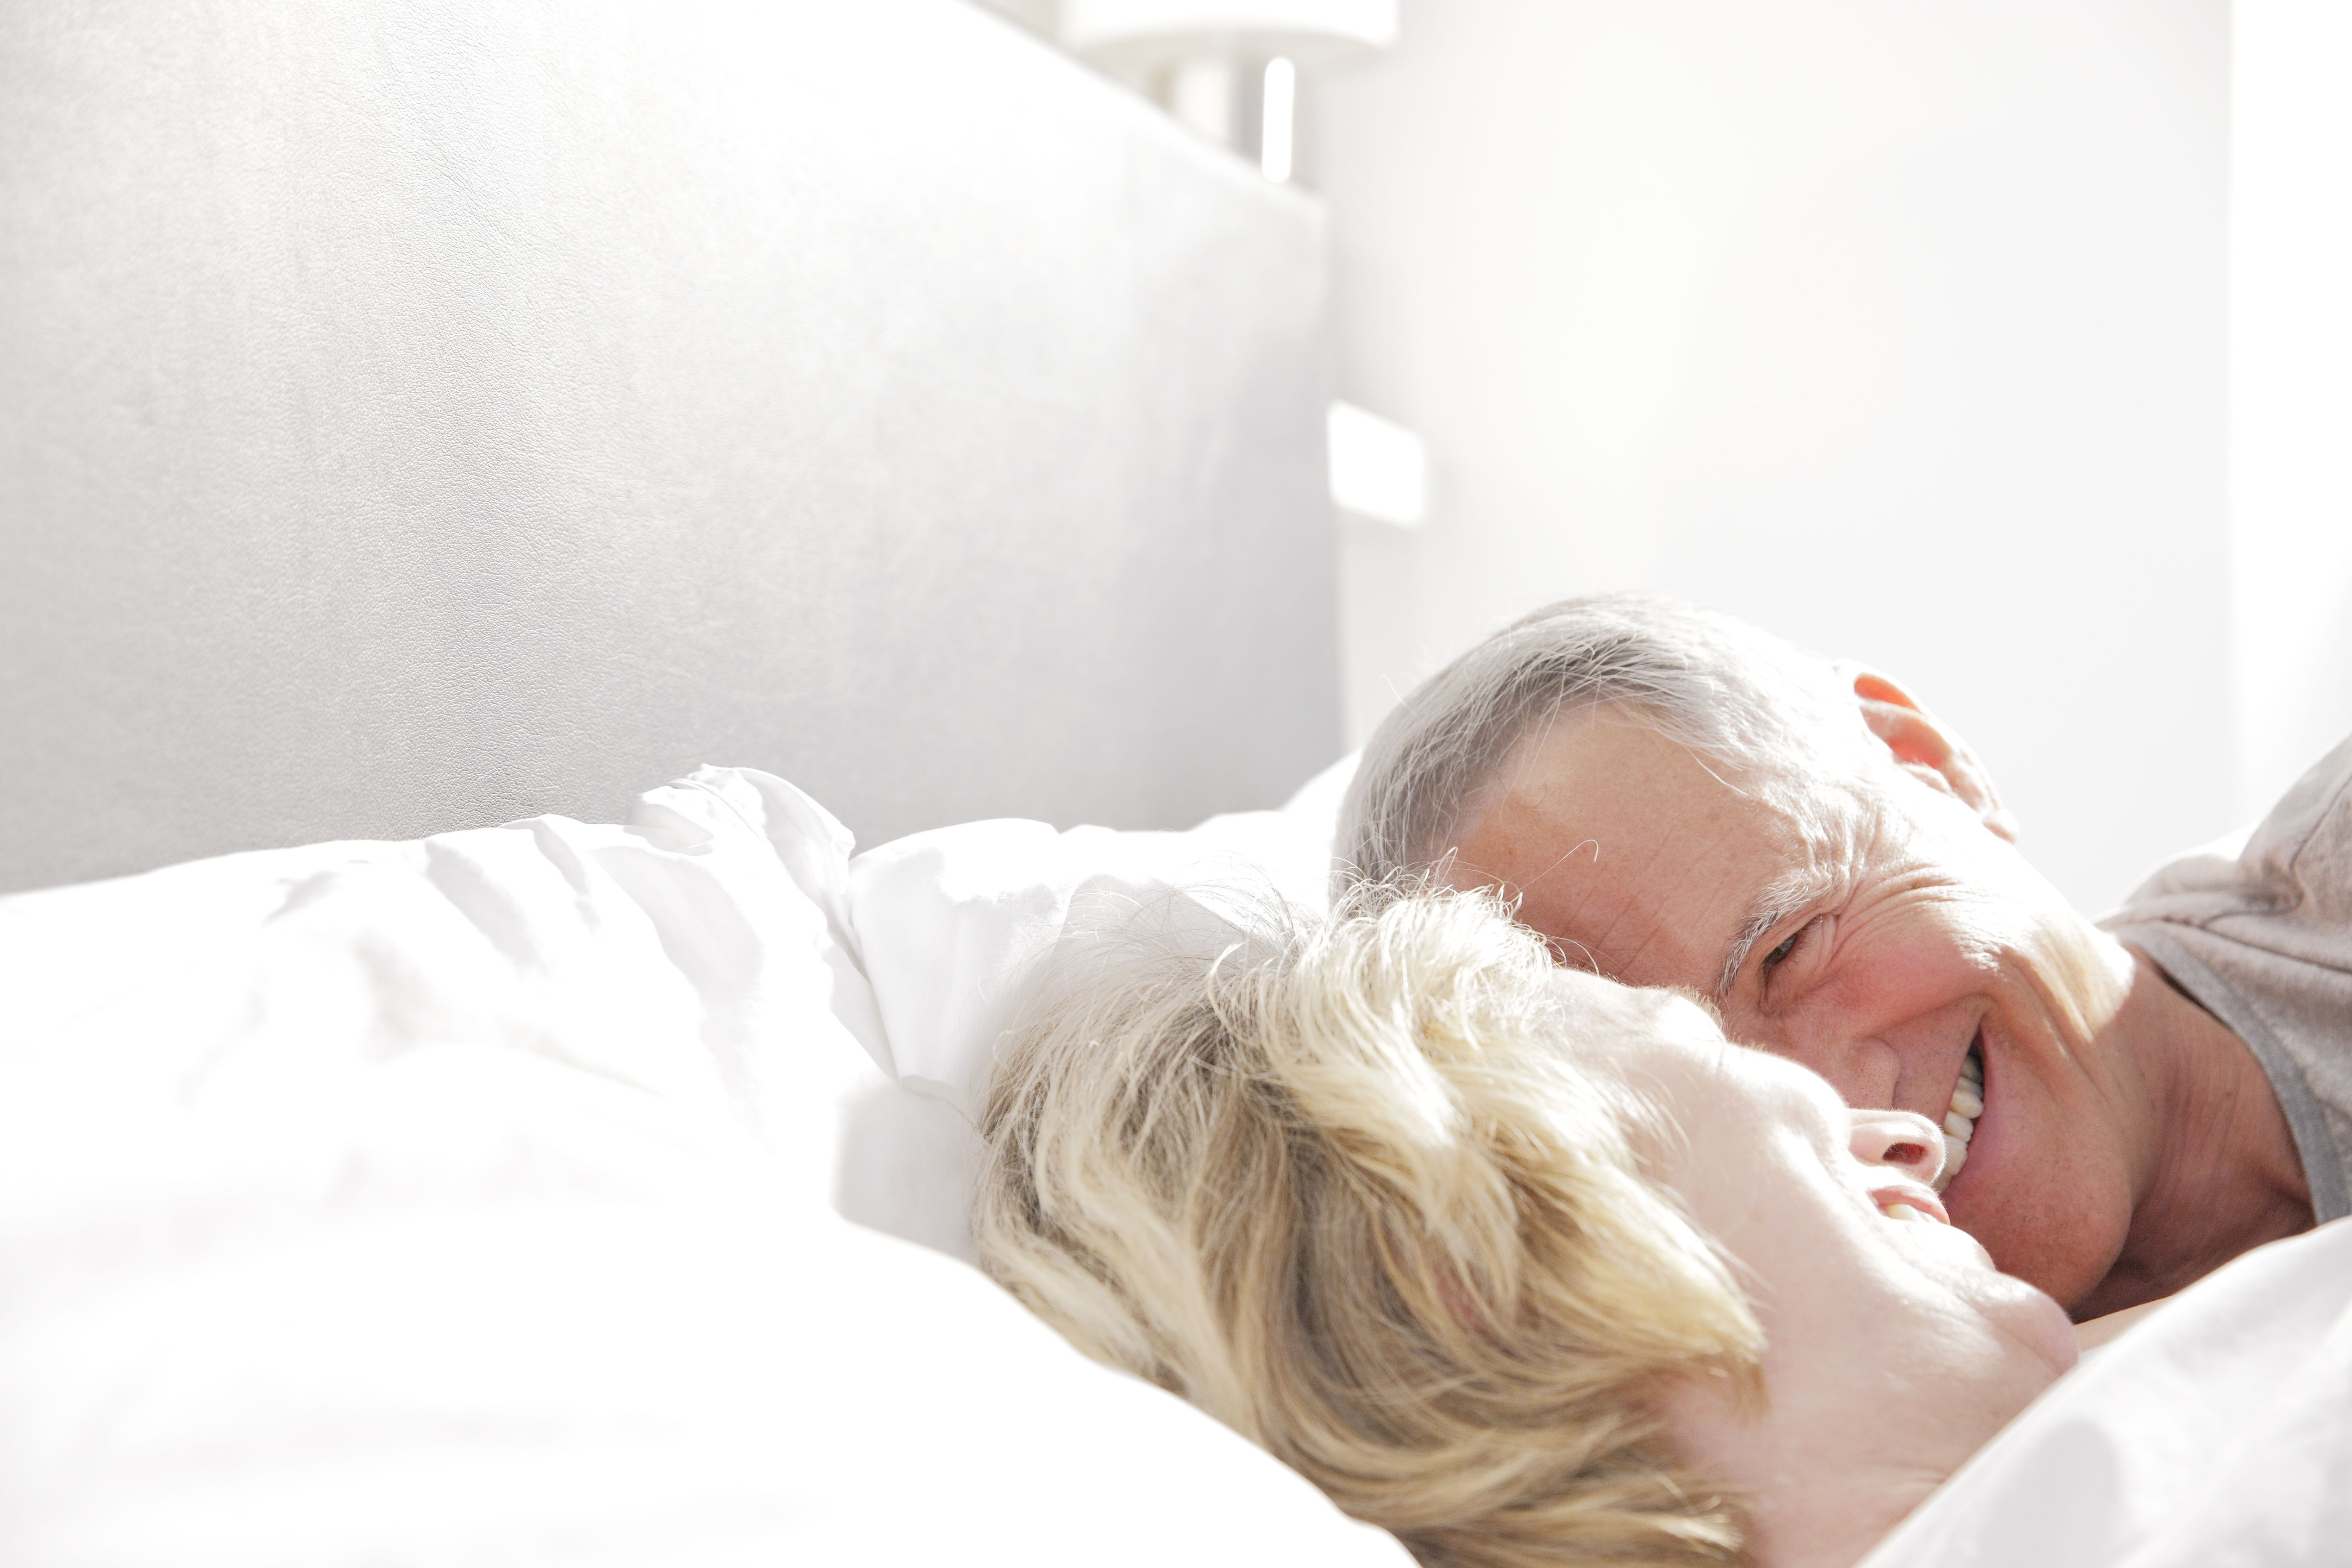 A Urologist Shared 8 Tips for Having Great Sex Over the Age of 50 picture